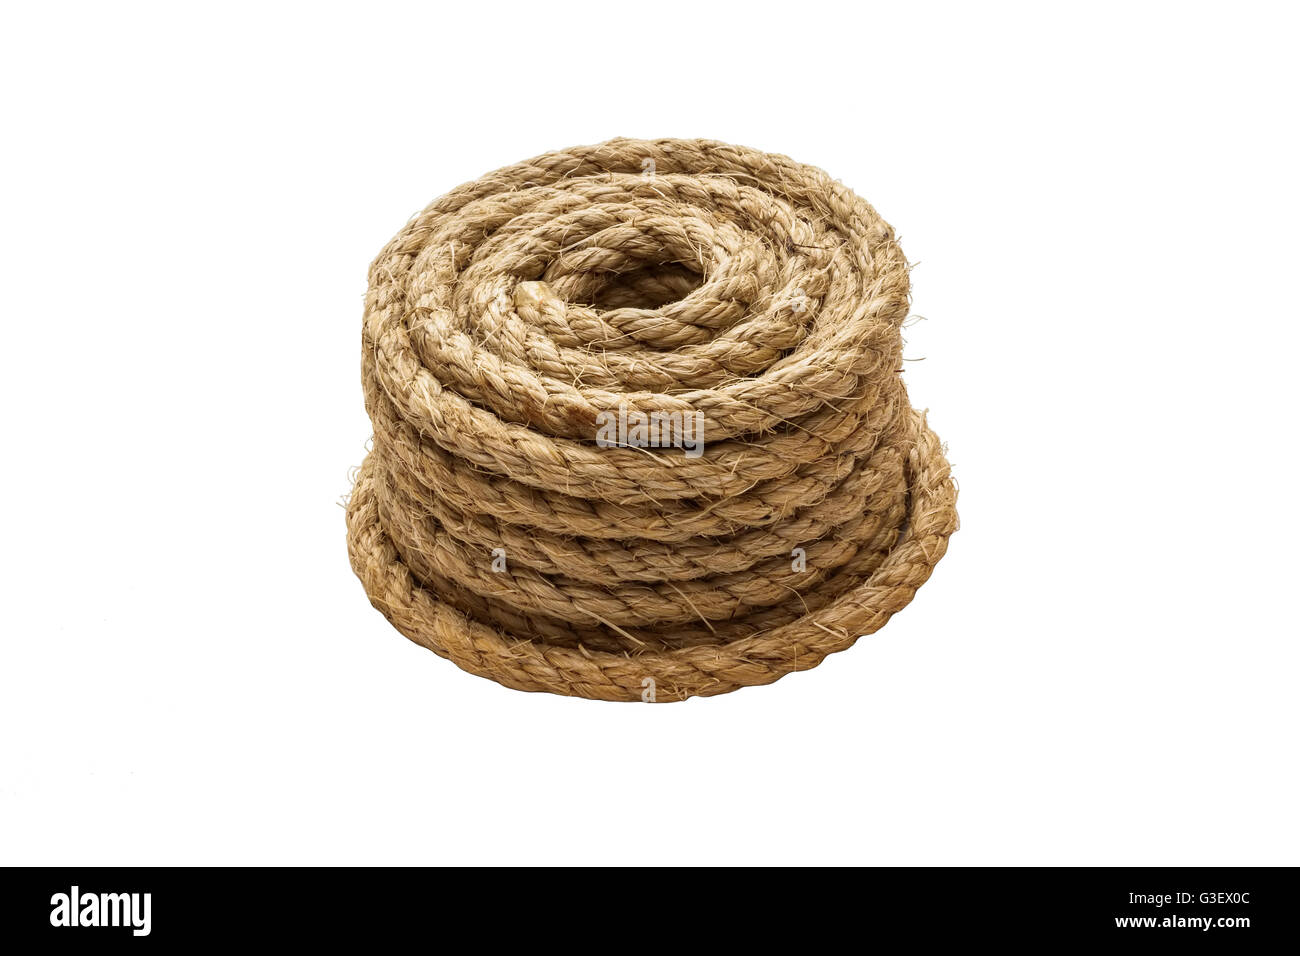 Small Rope Coiled on White Background Stock Photo - Image of stack, rope:  31524982